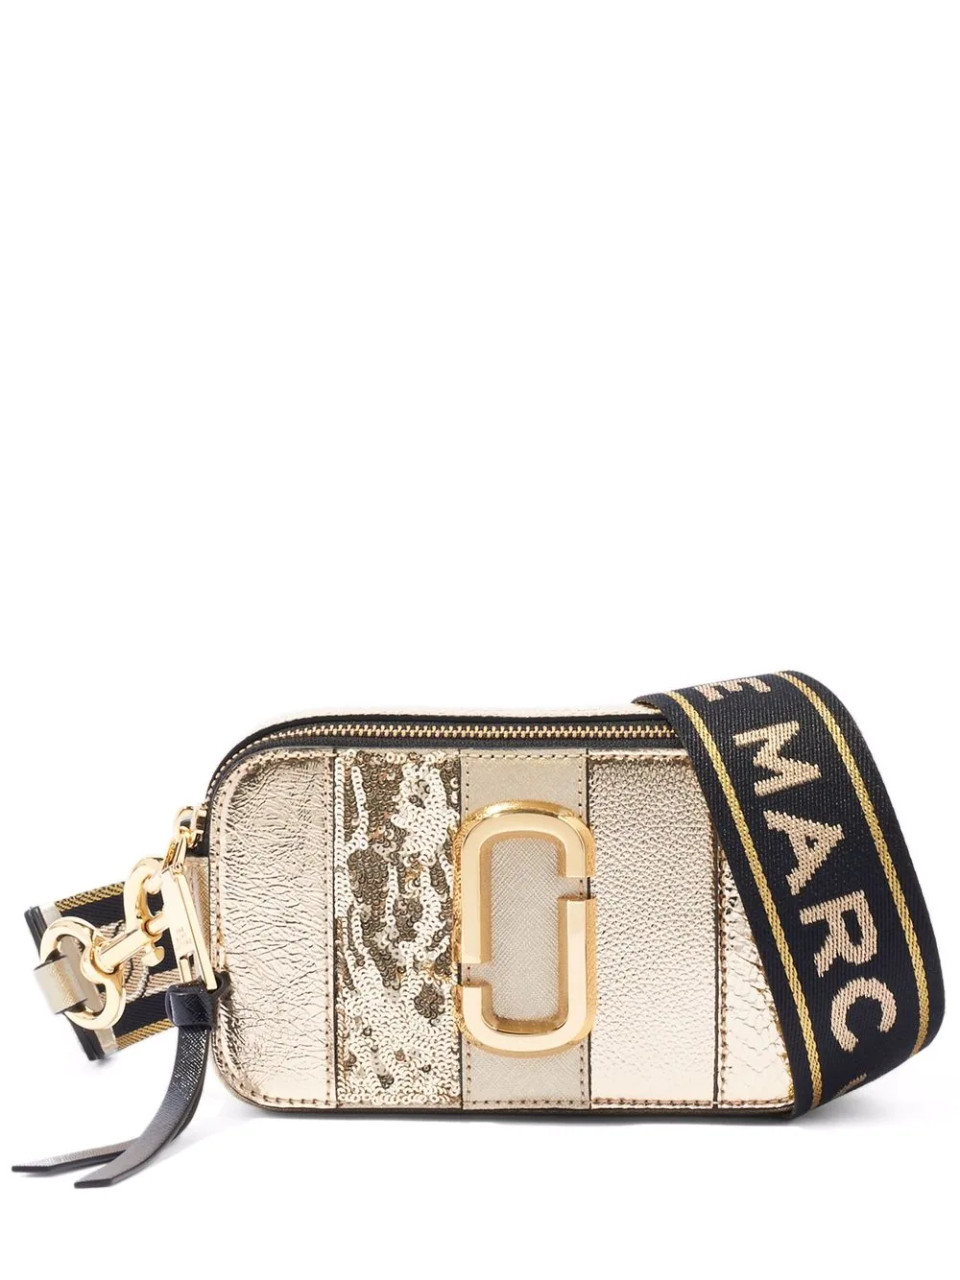 The Marc Jacobs Snapshot Small Camera Bag shoulder bag in gold